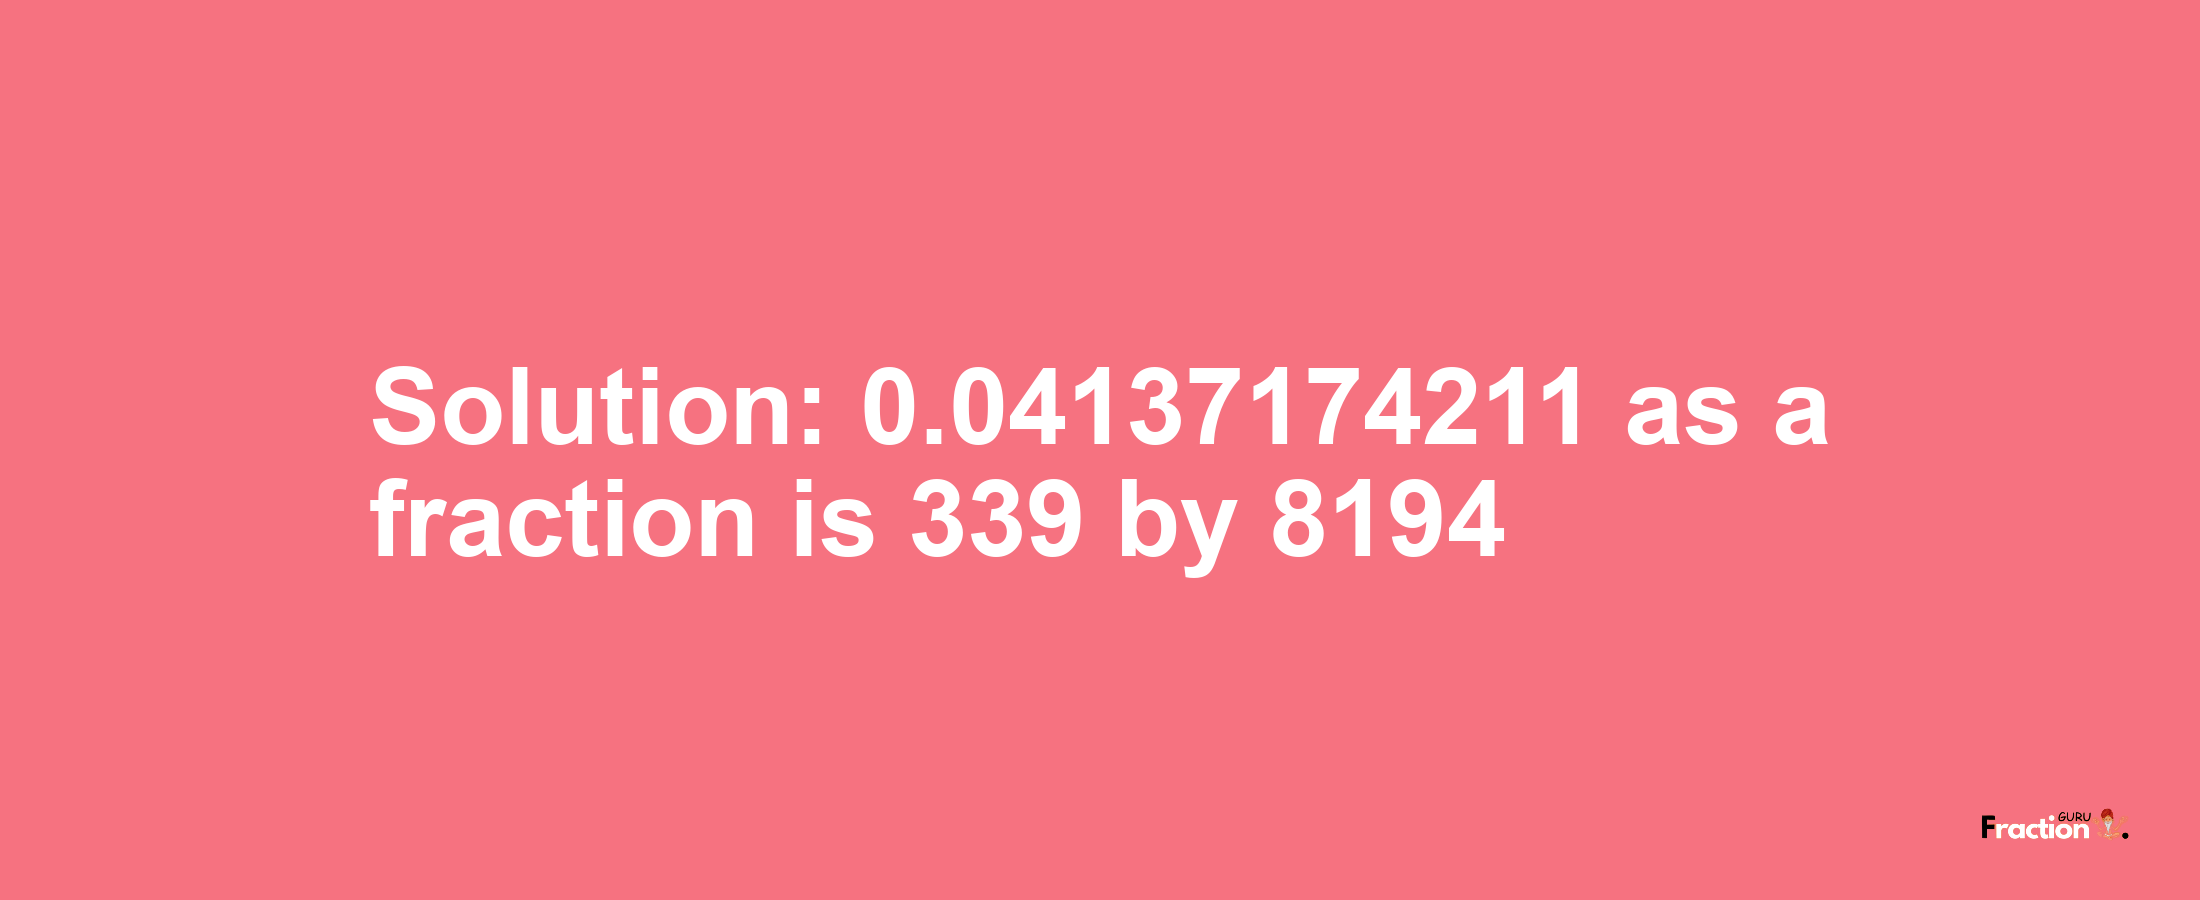 Solution:0.04137174211 as a fraction is 339/8194